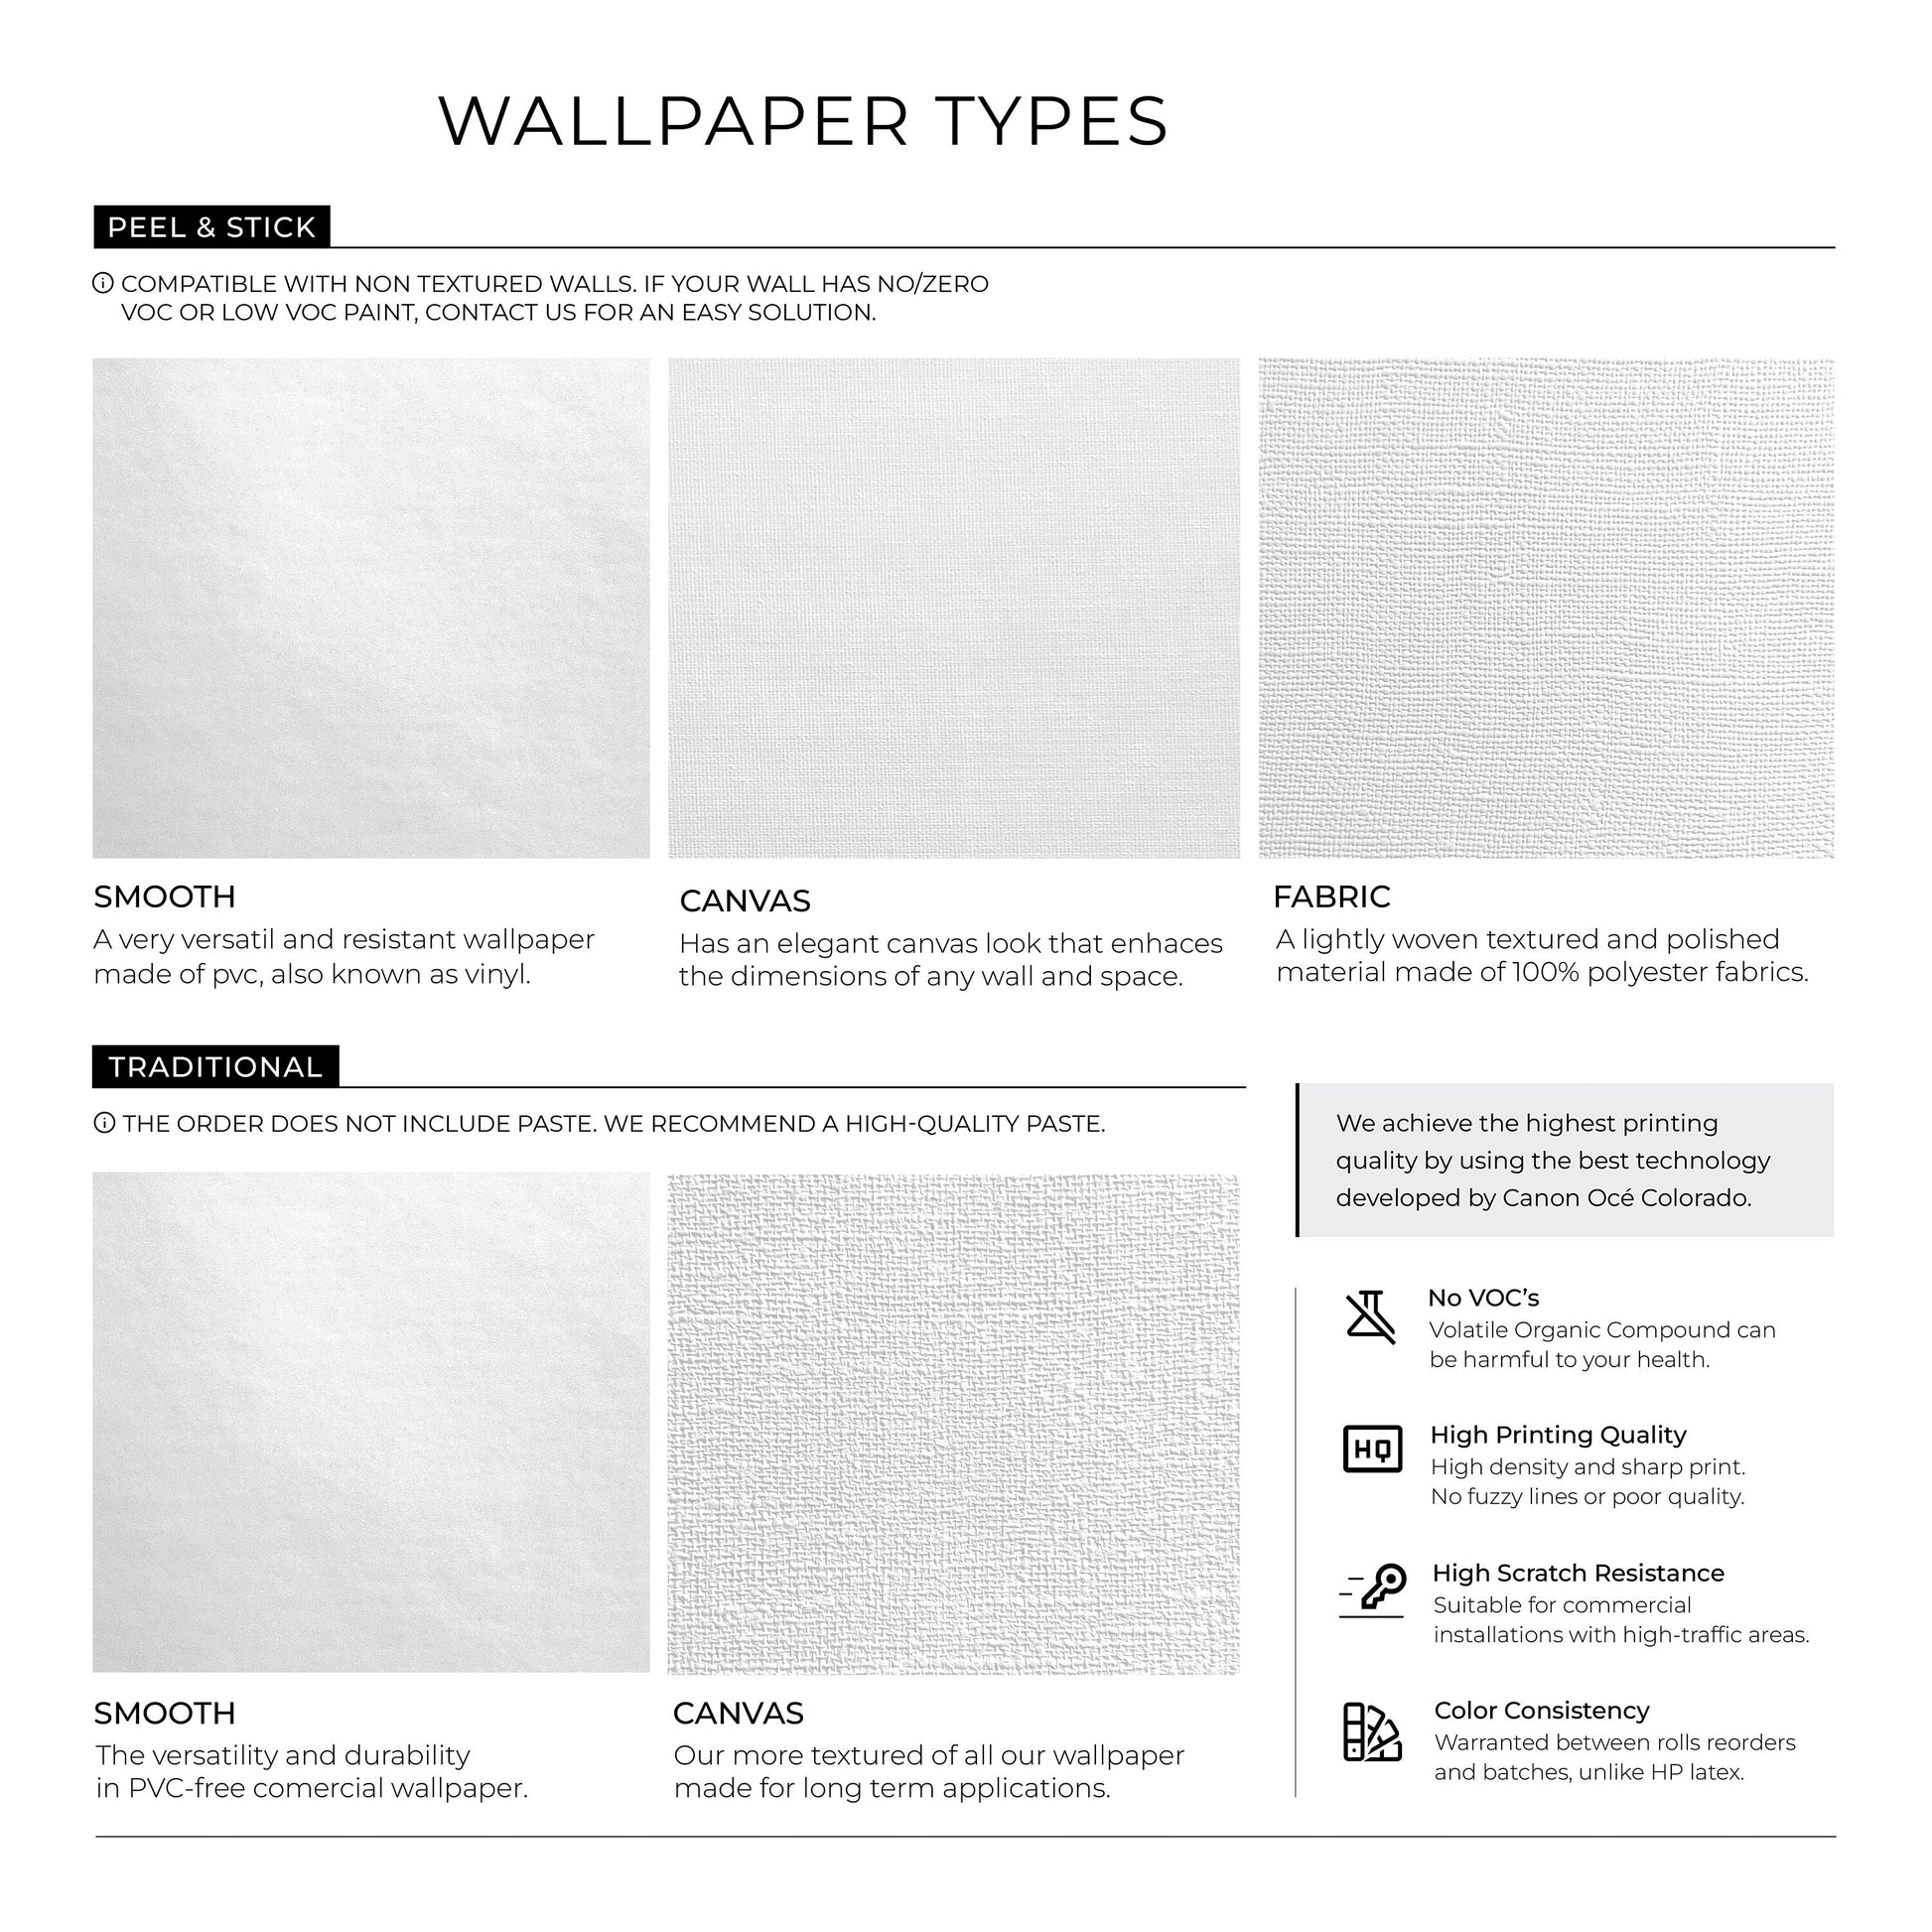 Gray Abstract Lines Wallpaper / Peel and Stick Wallpaper Removable Wallpaper Home Decor Wall Art Wall Decor Room Decor - C655